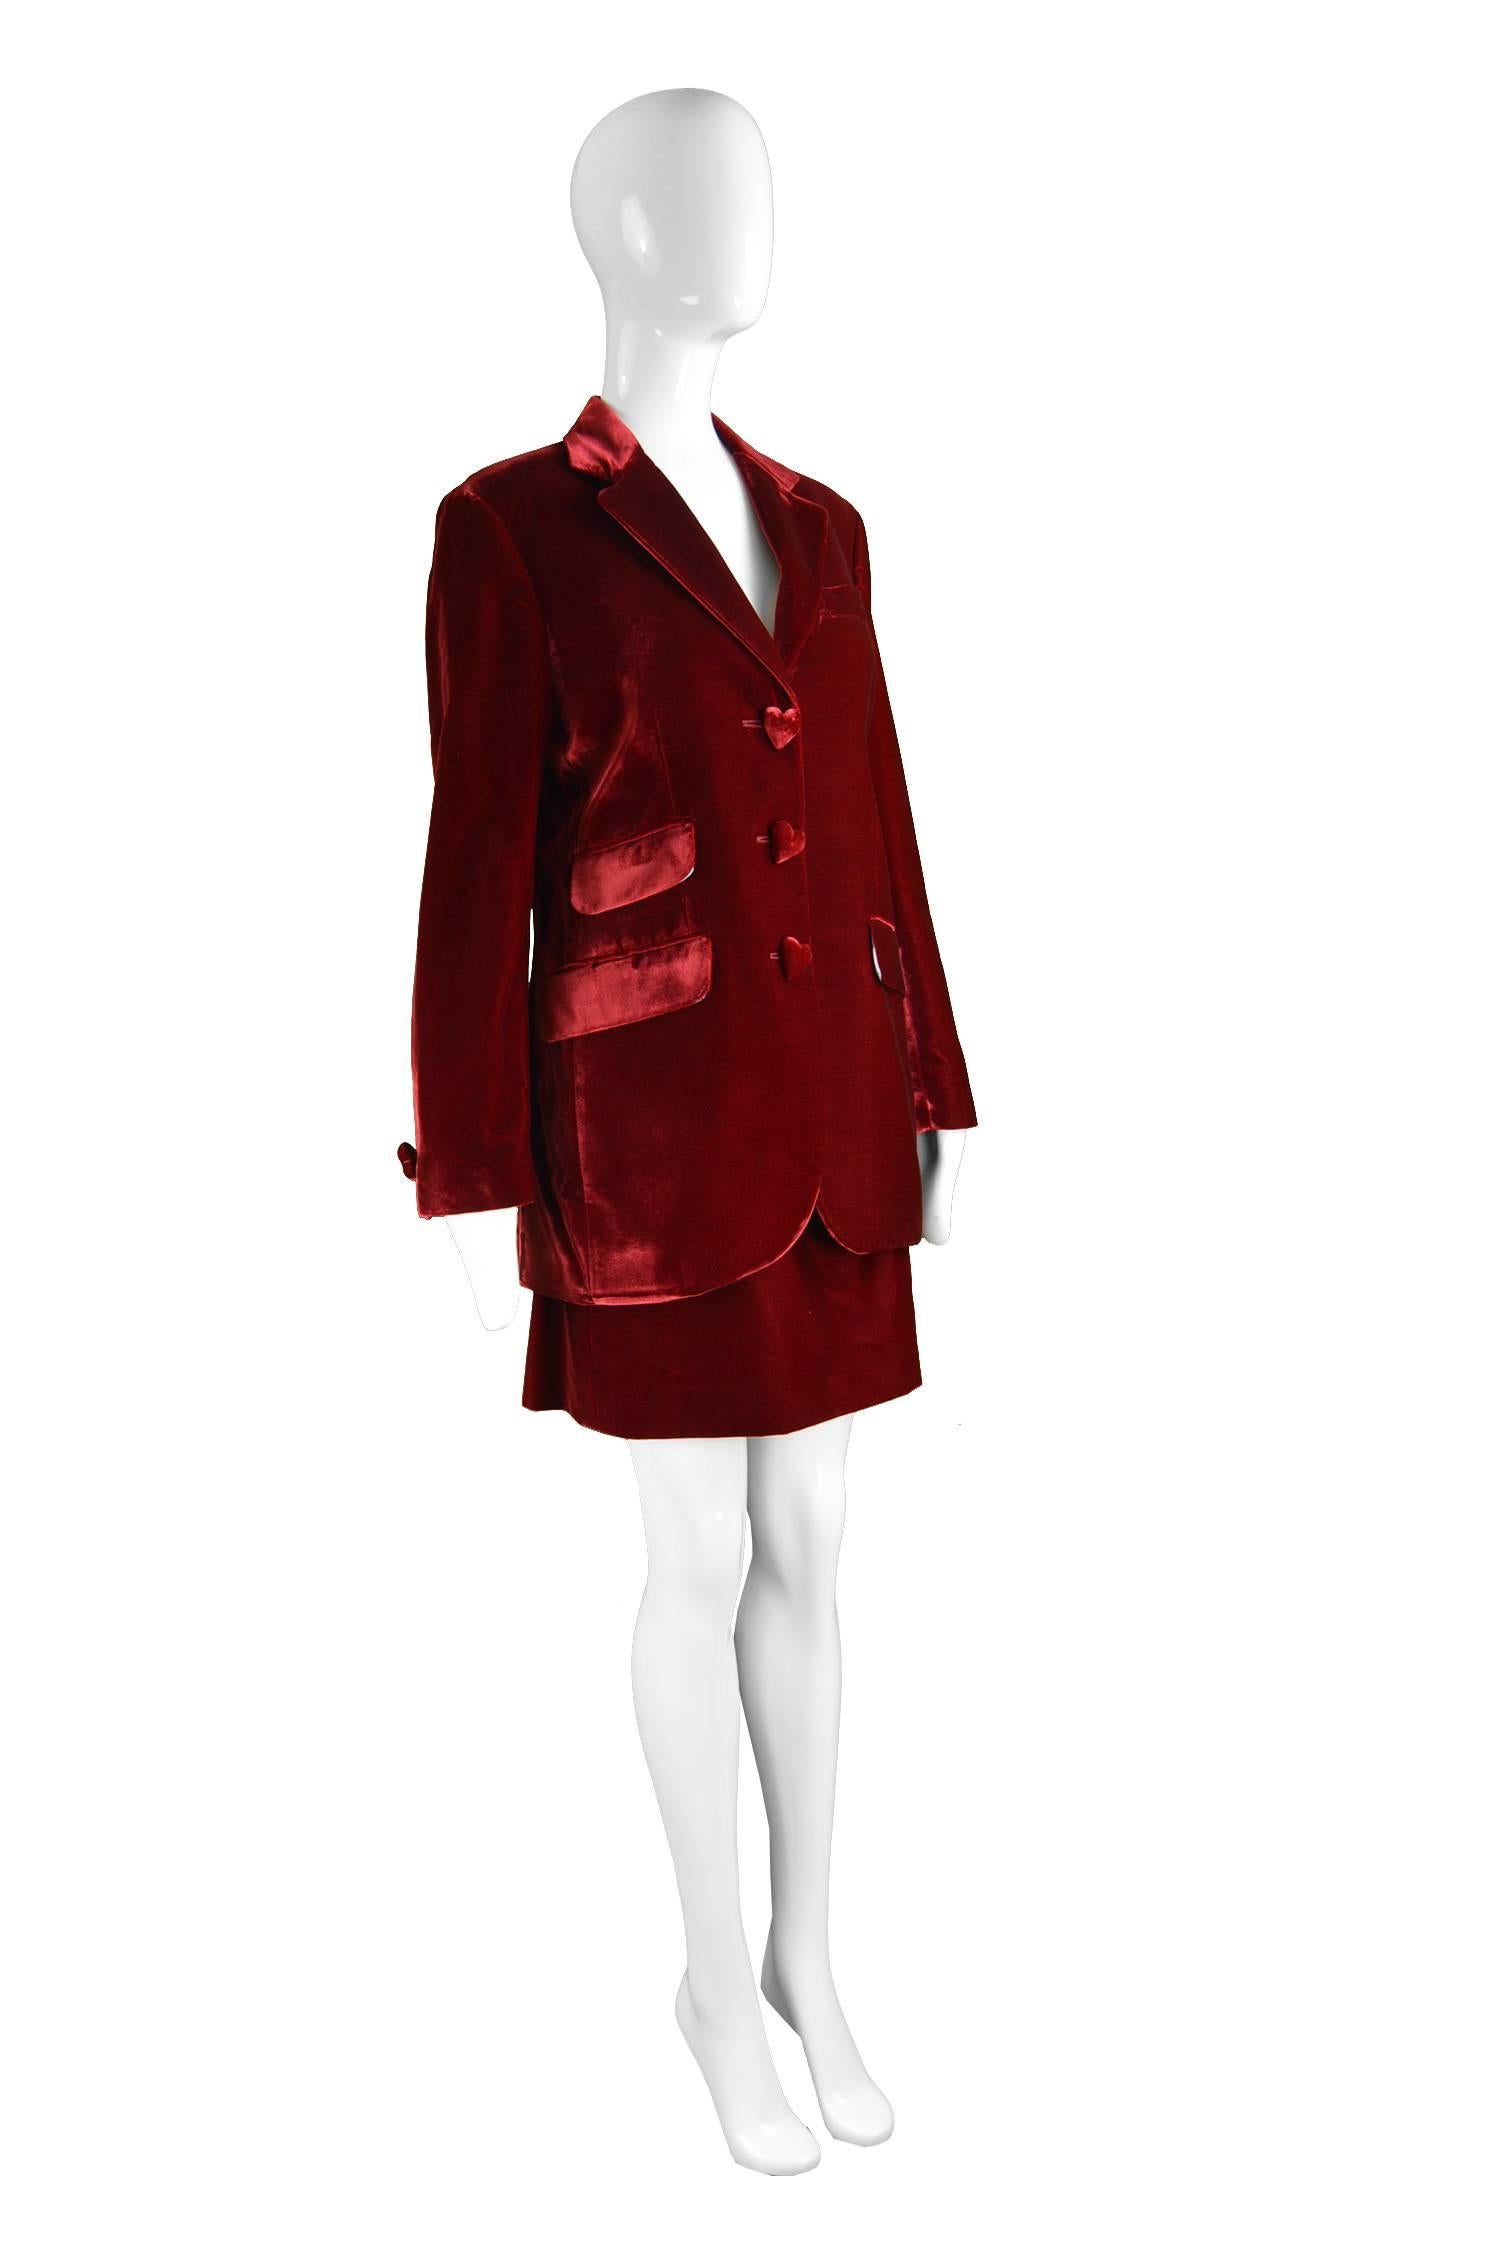 Moschino Deep Red Velvet Heart Button Skirt Suit & Cloud Silk Lining, 1990s In Excellent Condition For Sale In Doncaster, South Yorkshire